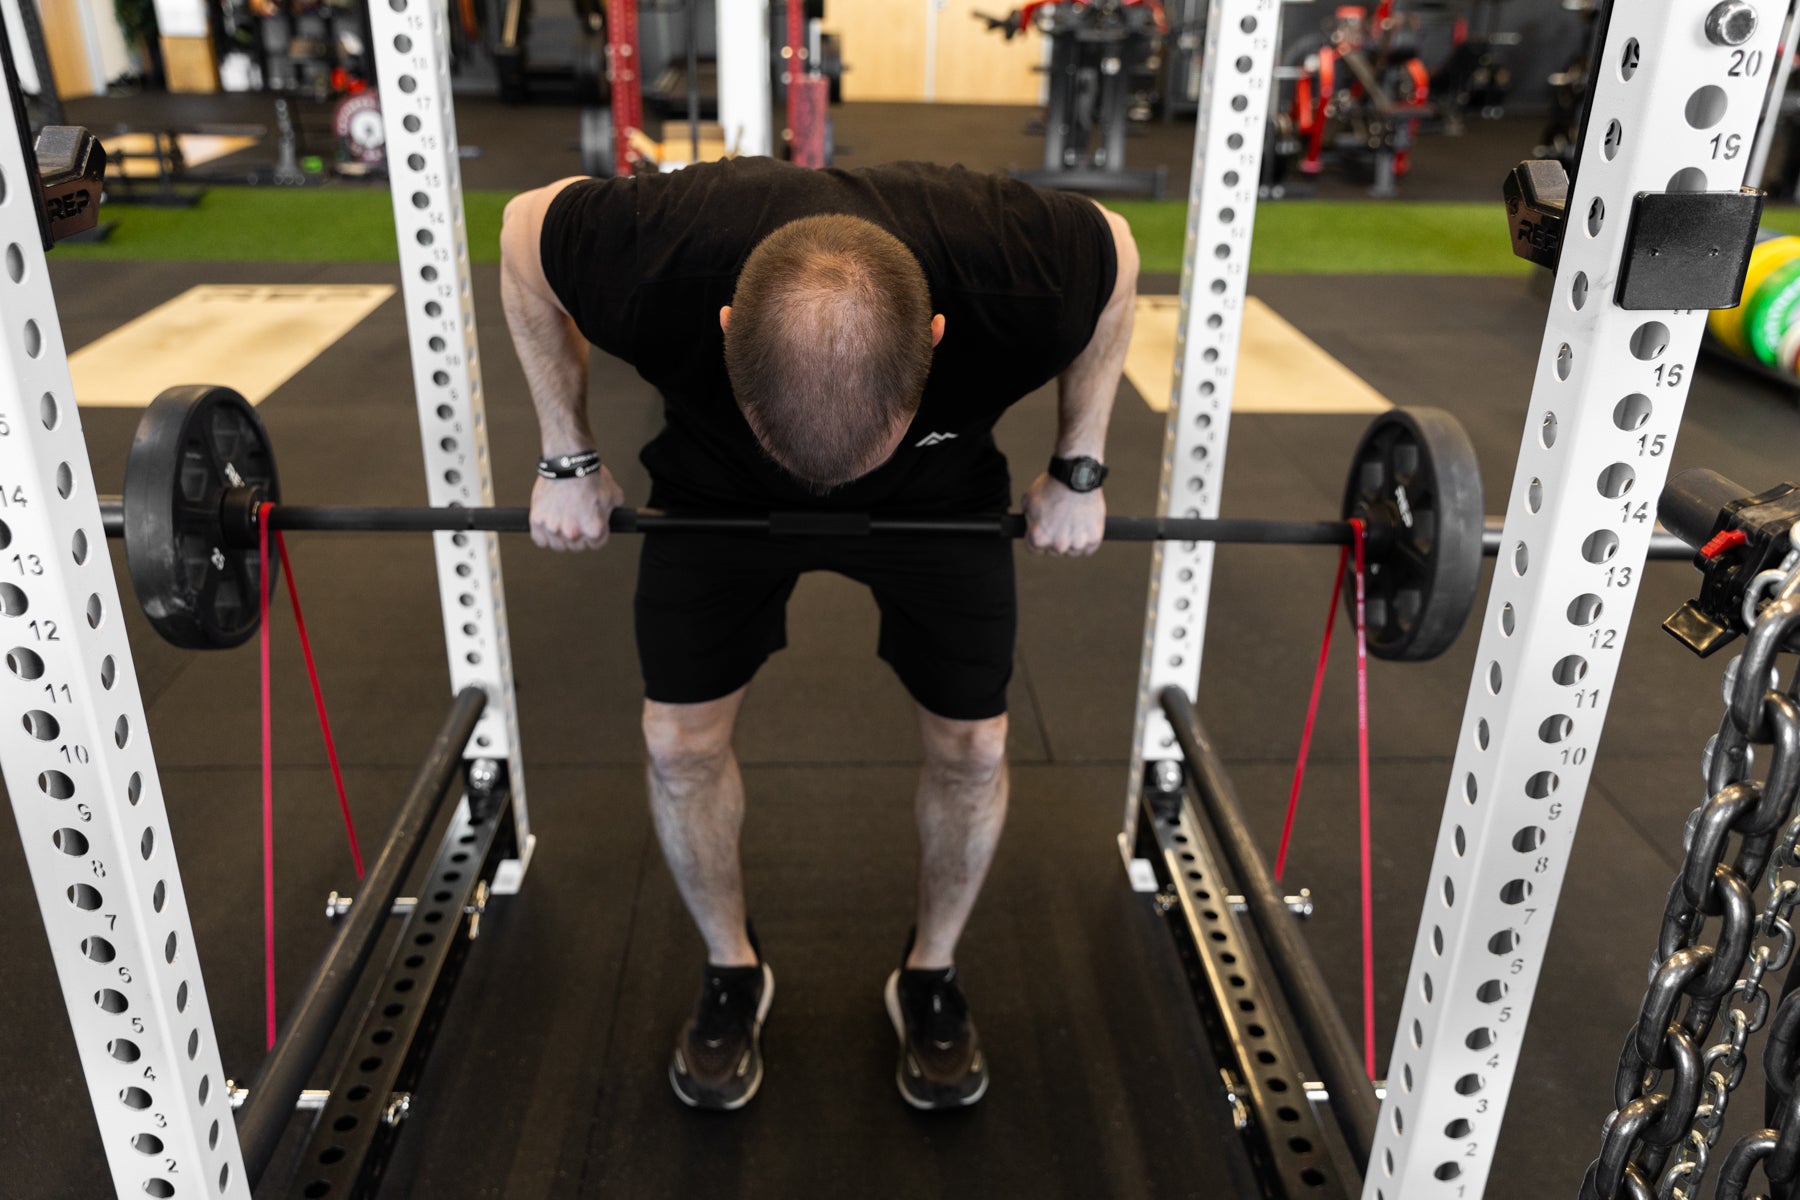 Lifter performing bent over rows with a barbell loaded with a pair of 25lb plates and a pair of red short resistance bands for added resistance.